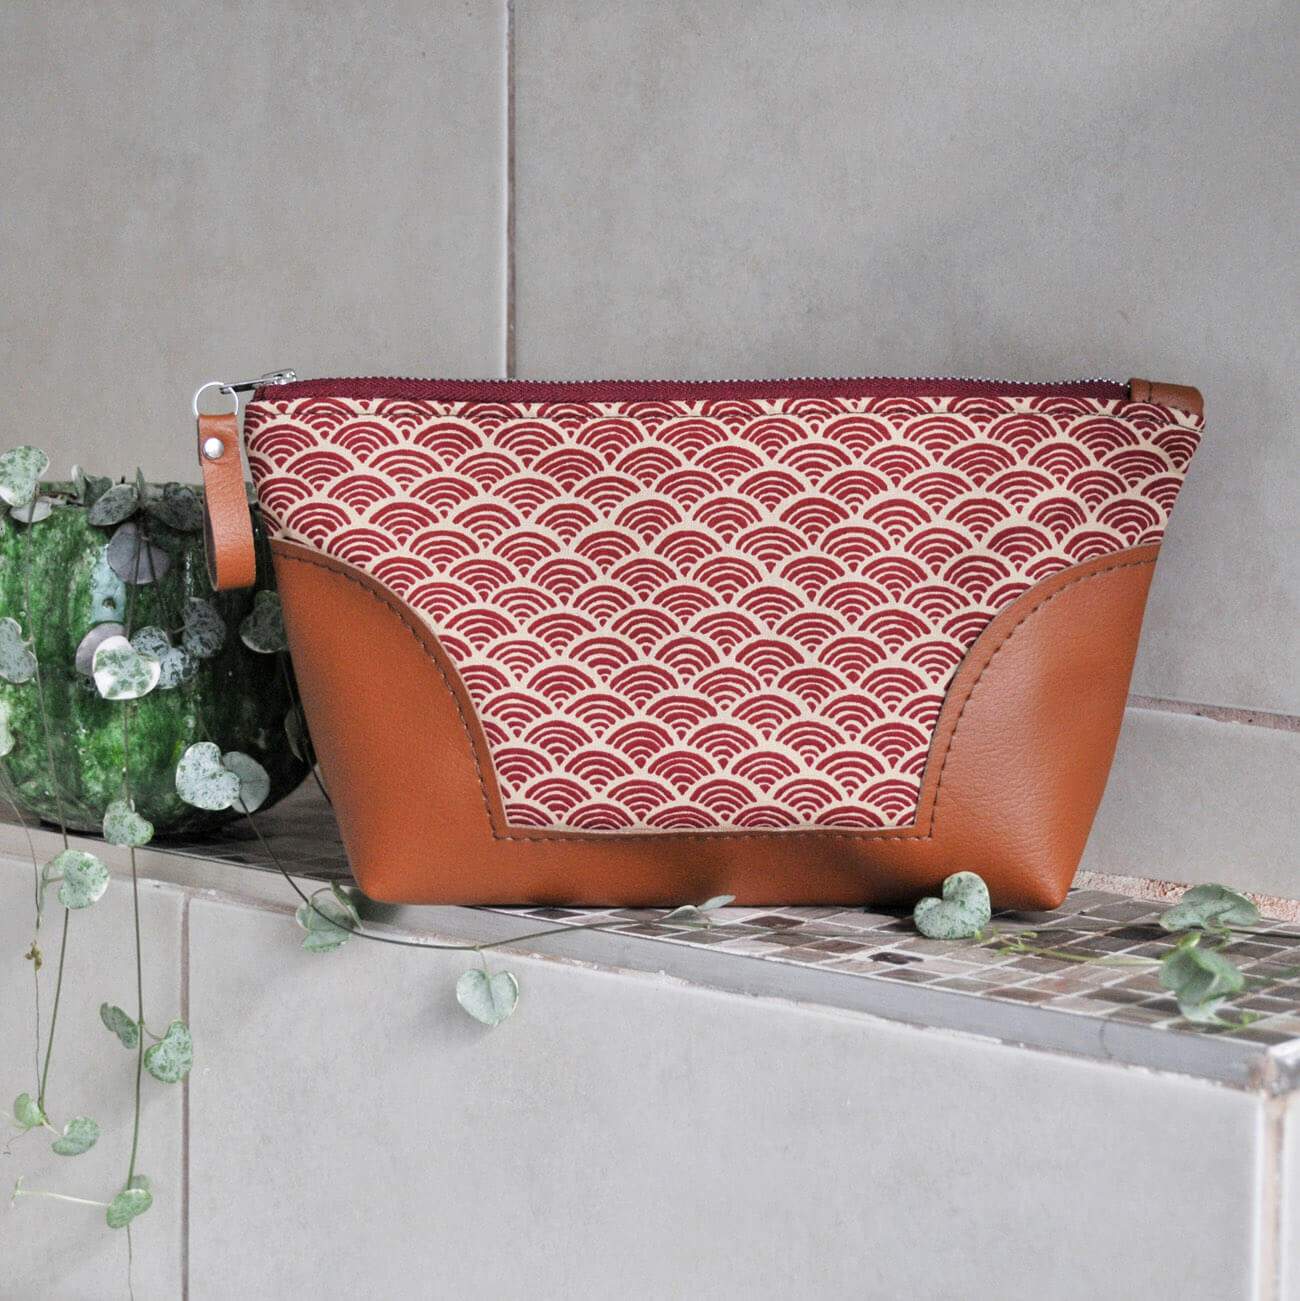 Recycled leather make up and toiletry bag in red Japanese wave. Gifts for mum by Lauren Holloway, handmade sustainable bags and accessories made in the UK